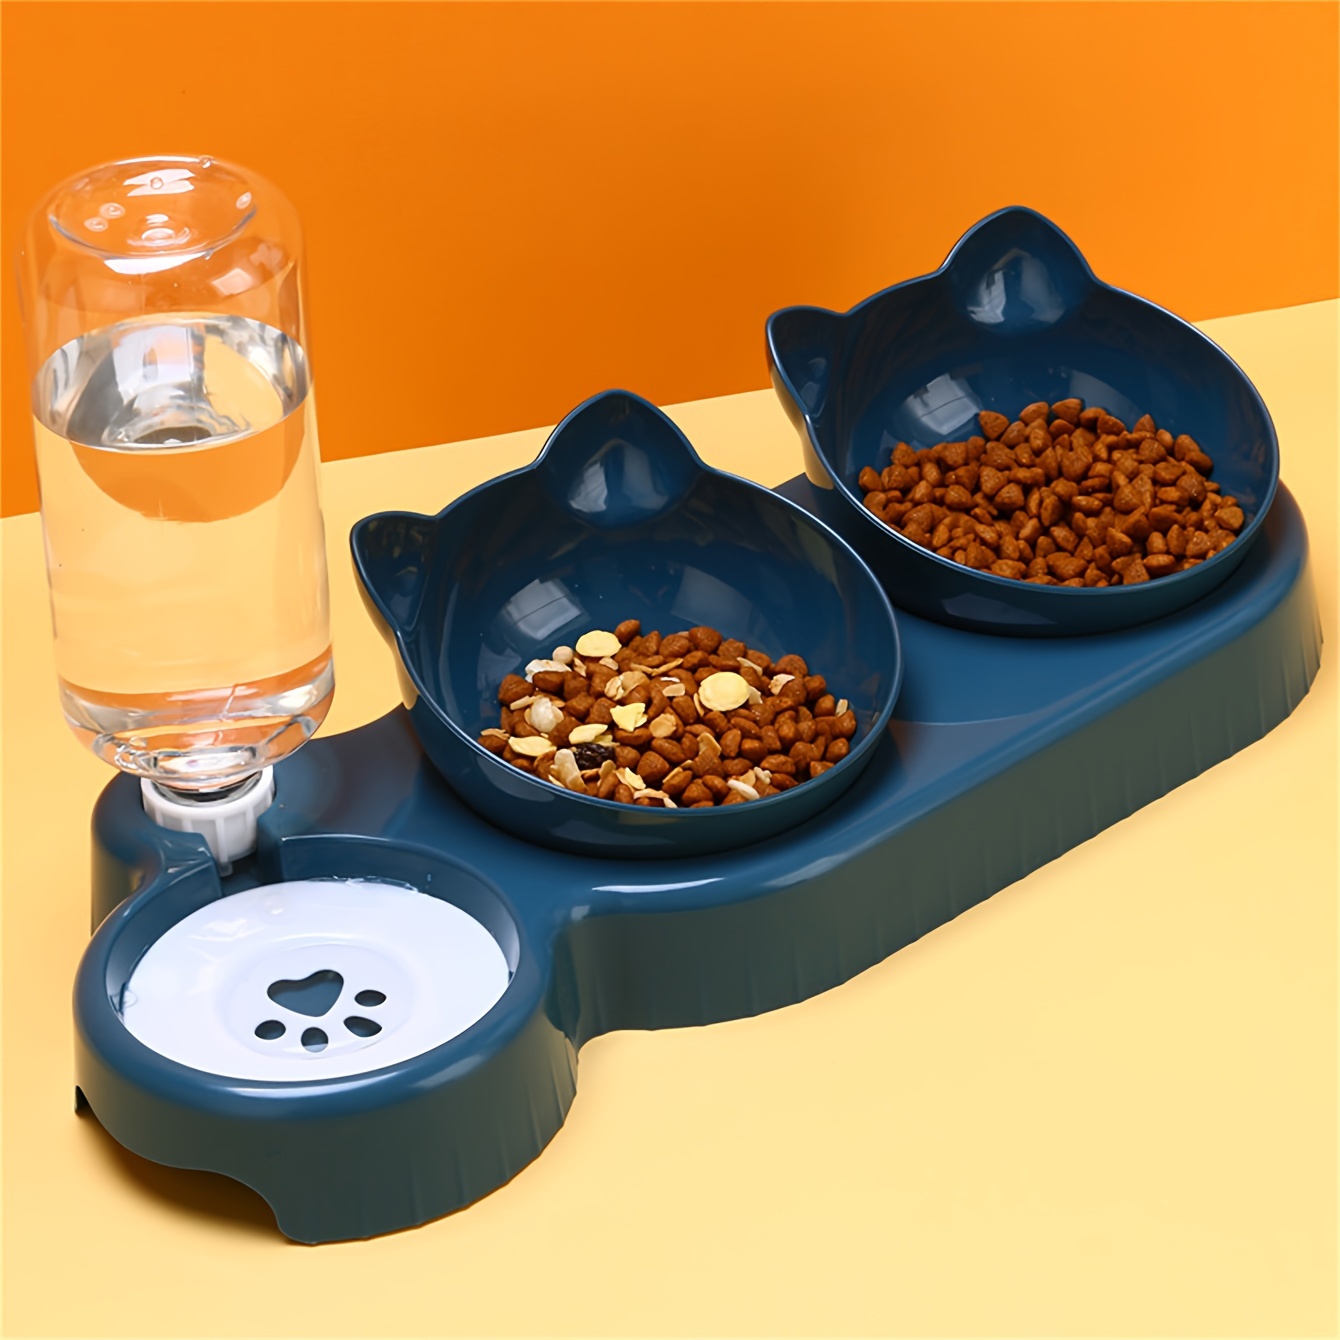 

Cat Bowls Double Feeder - Plastic Pet Food & Water Bowls For Cats, Automatic Water Dispenser, Dual Dish Set With Paw Print Design